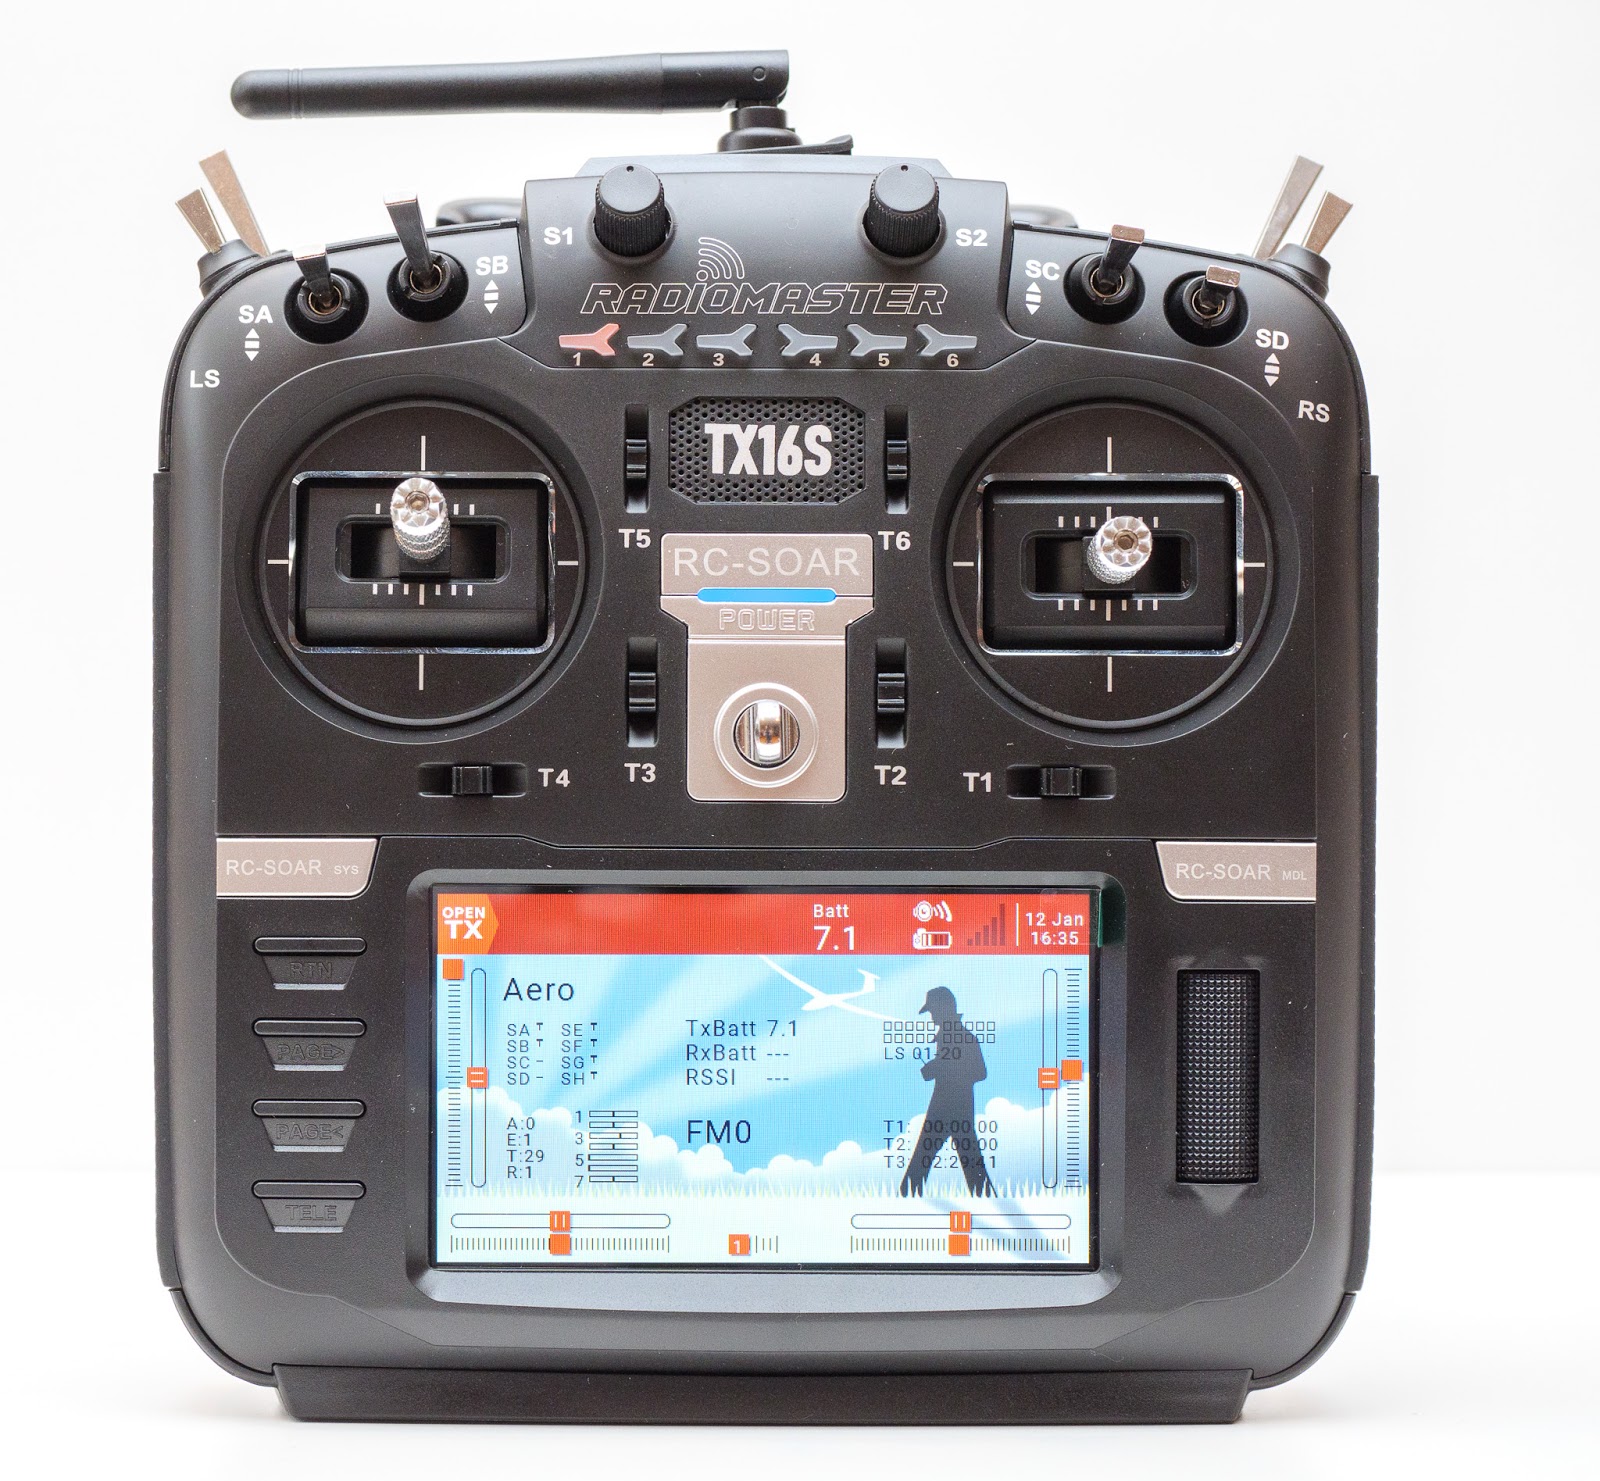 RC-SOAR - the Blog: RadioMaster TX16S review: can it crush my X9D